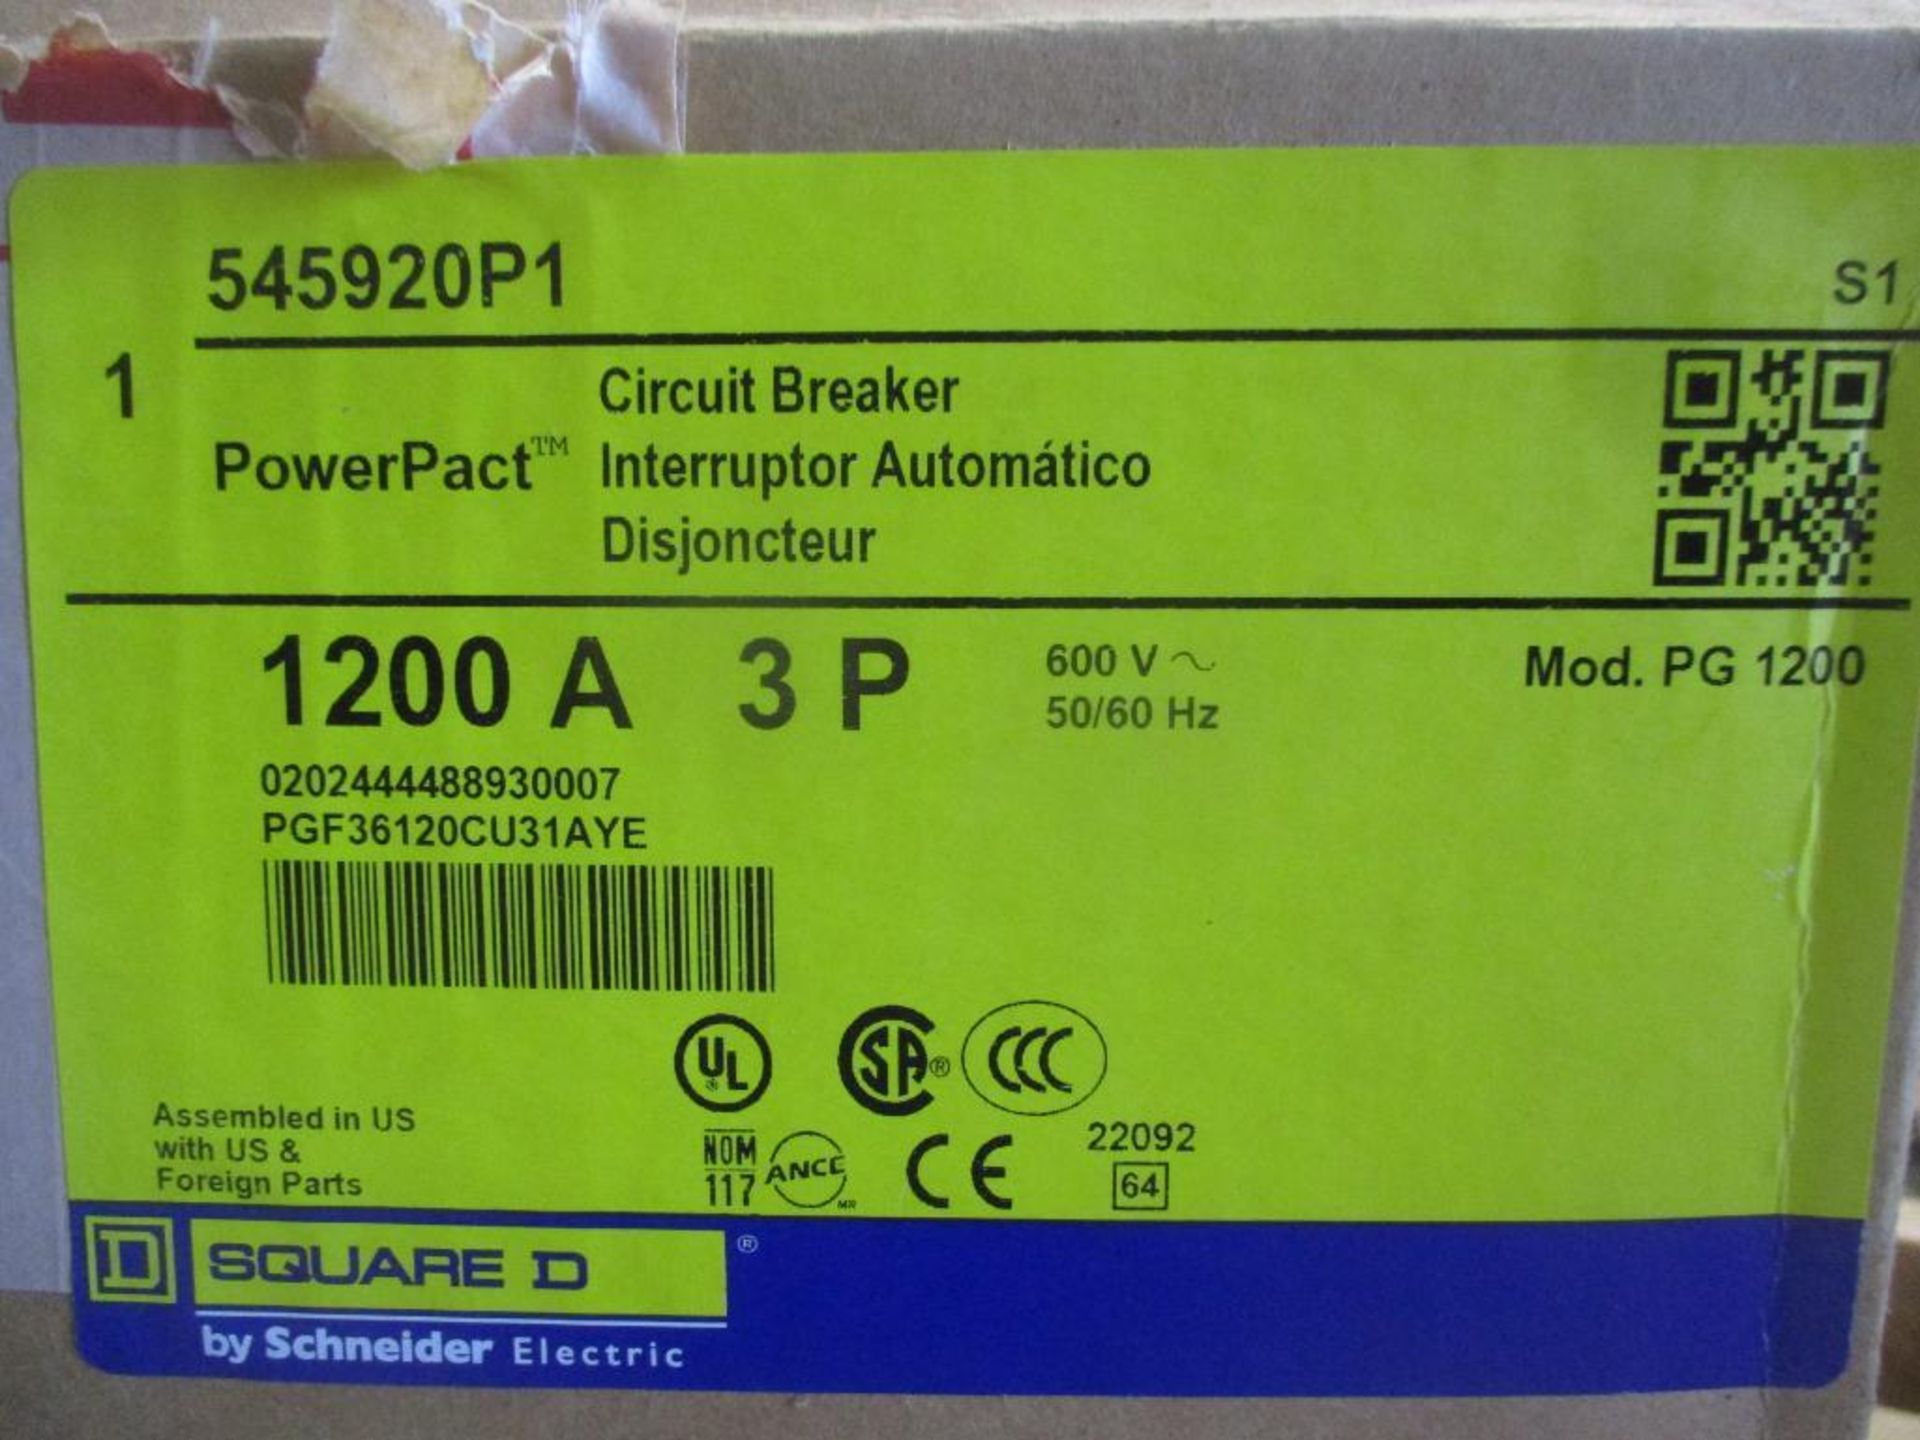 Square D 1200 AMP Circuit Breaker, 545920P1, 1200A, 3P, 600 VAC, Mod. PG 1200 (New in Box) - Image 4 of 4